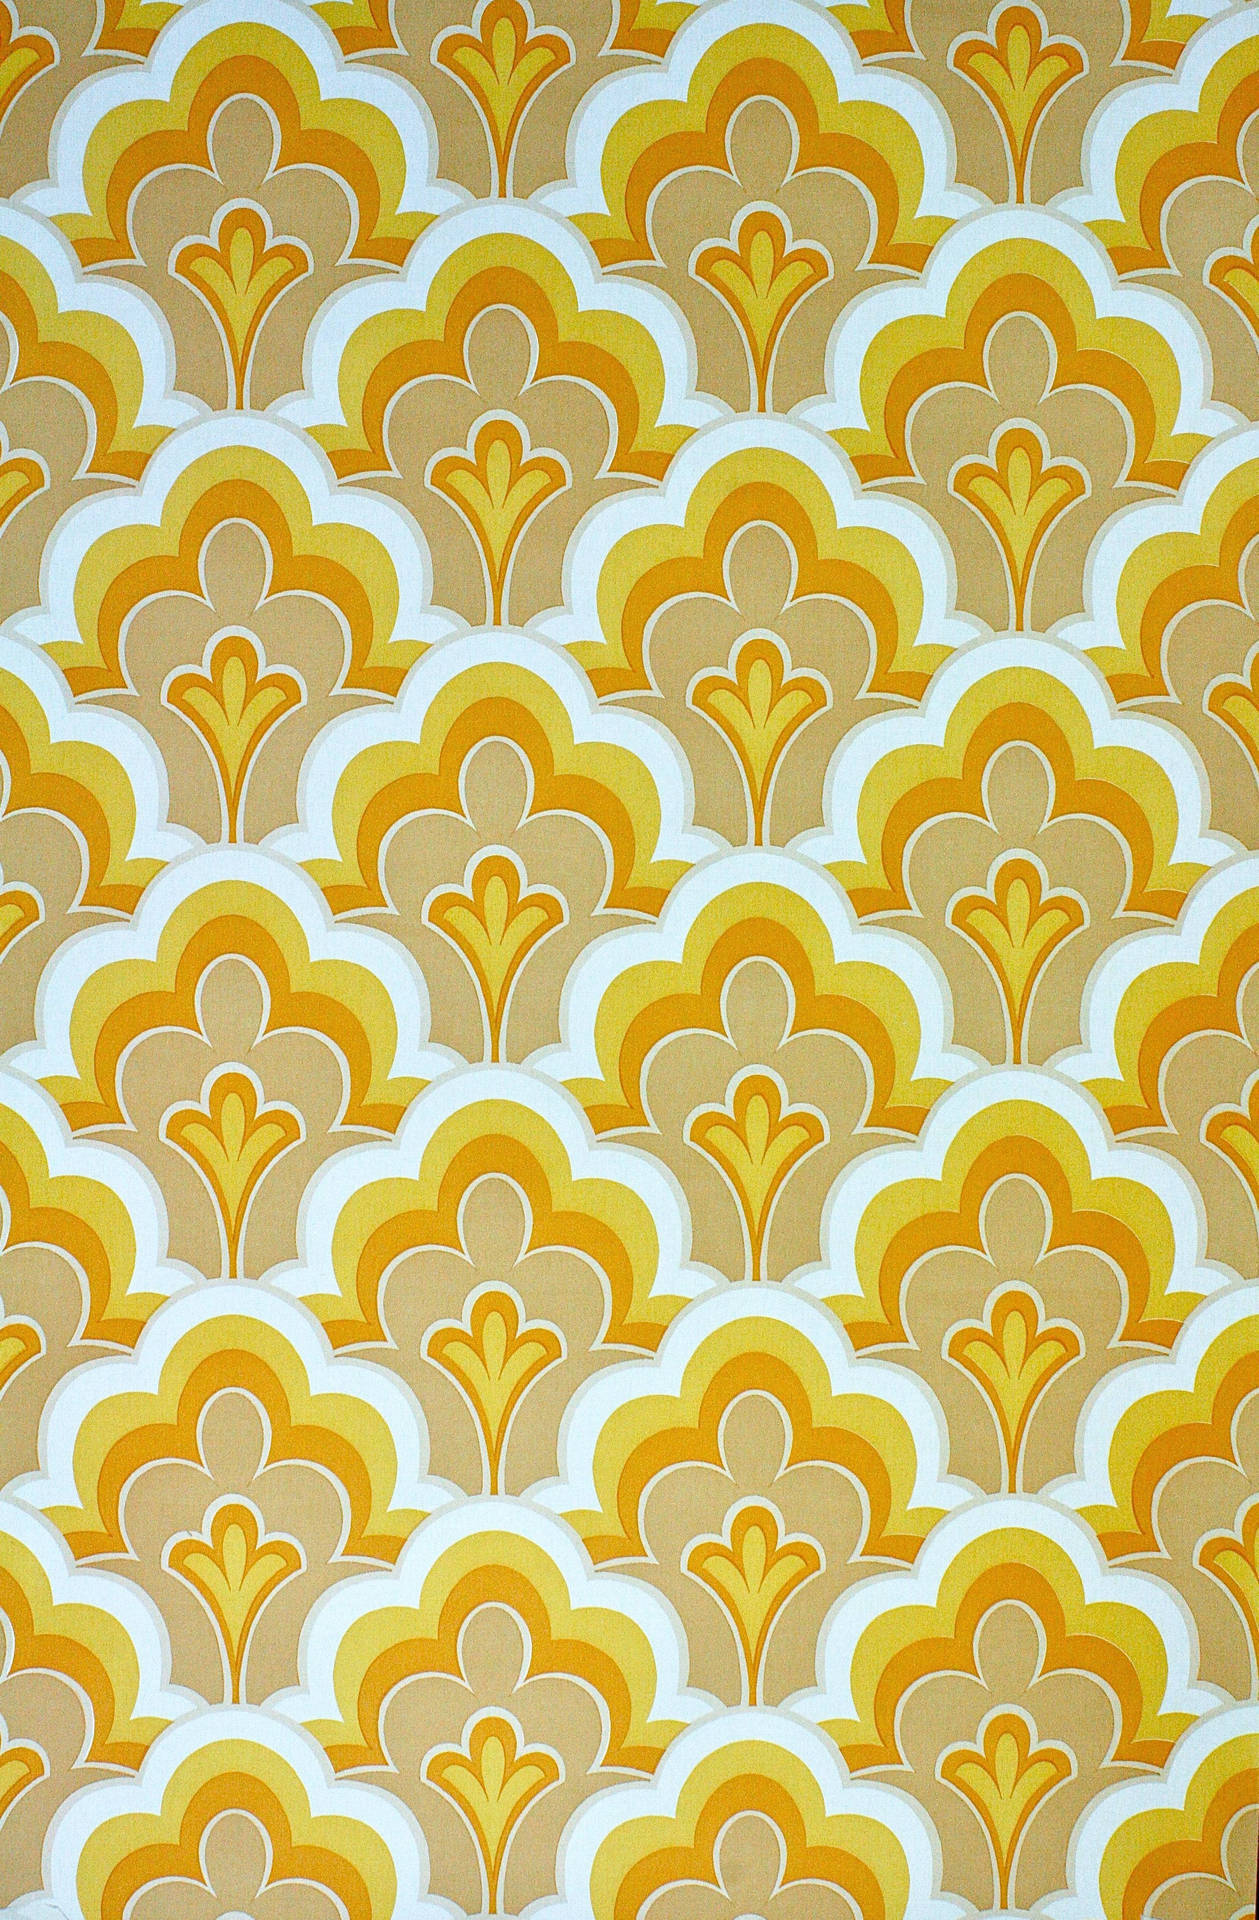 Celebrate the Decade of Disco with this ‘Vintage 70s’ Wallpaper Wallpaper